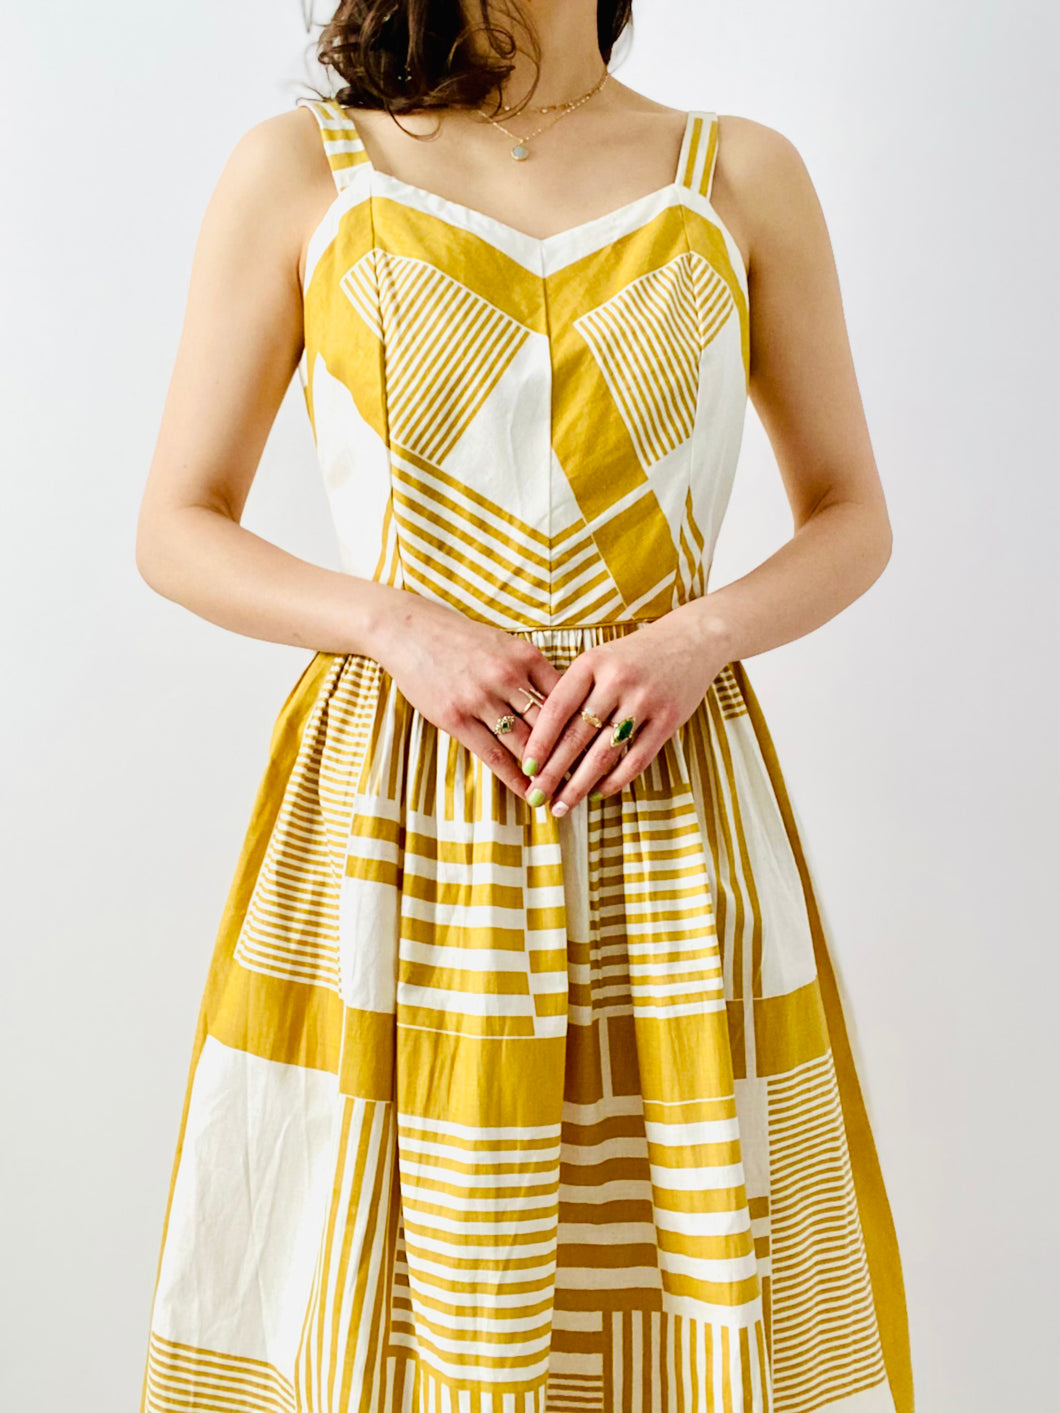 Vintage 1950s mustard color abstract print dress